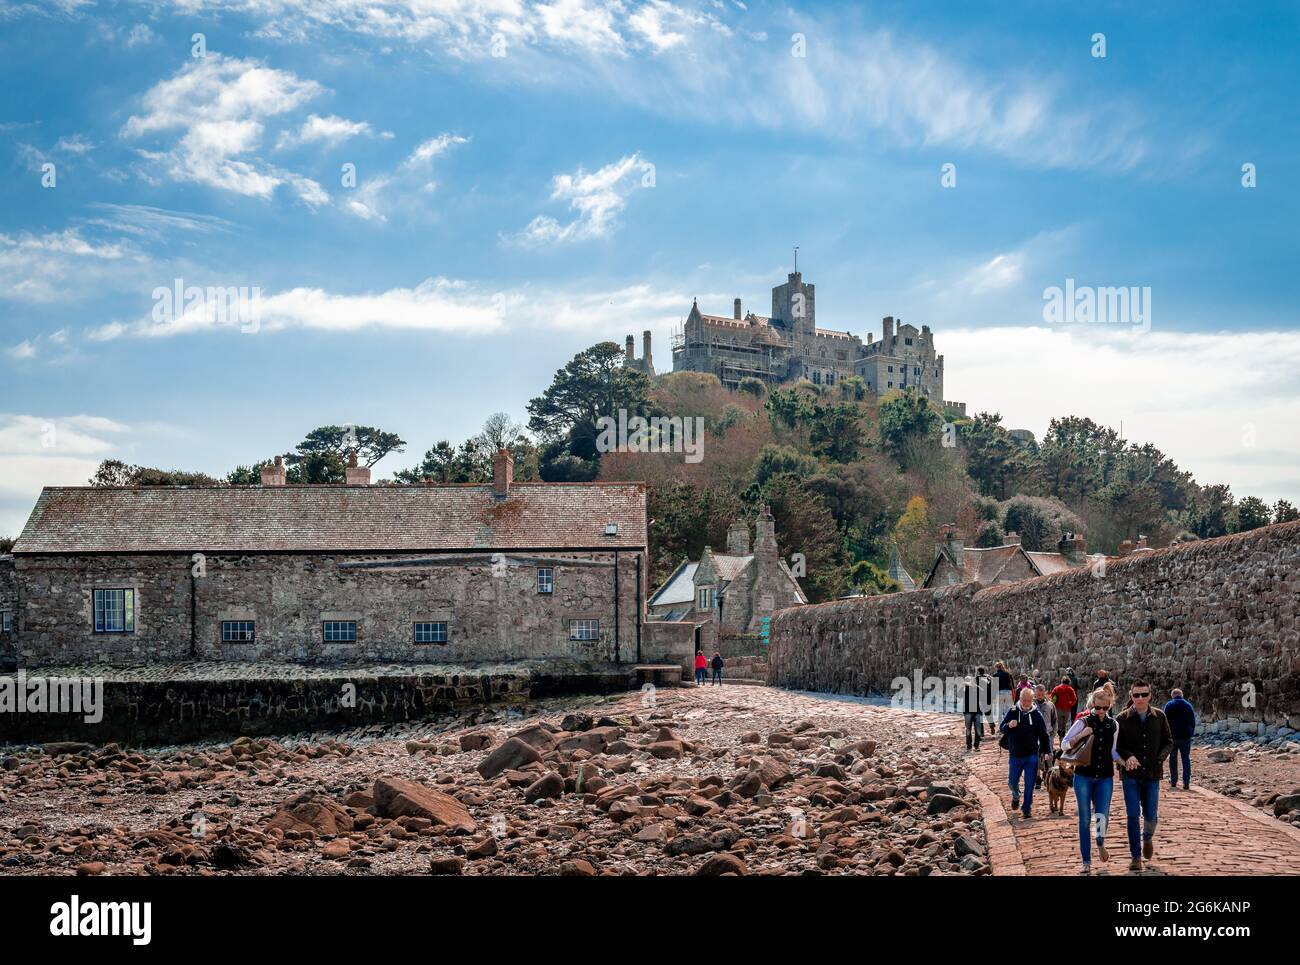 The Gateway to the parkland with the castle on the hill. St Michael's Mount is a tidal island in Mount's Bay, Cornwall. Stock Photo